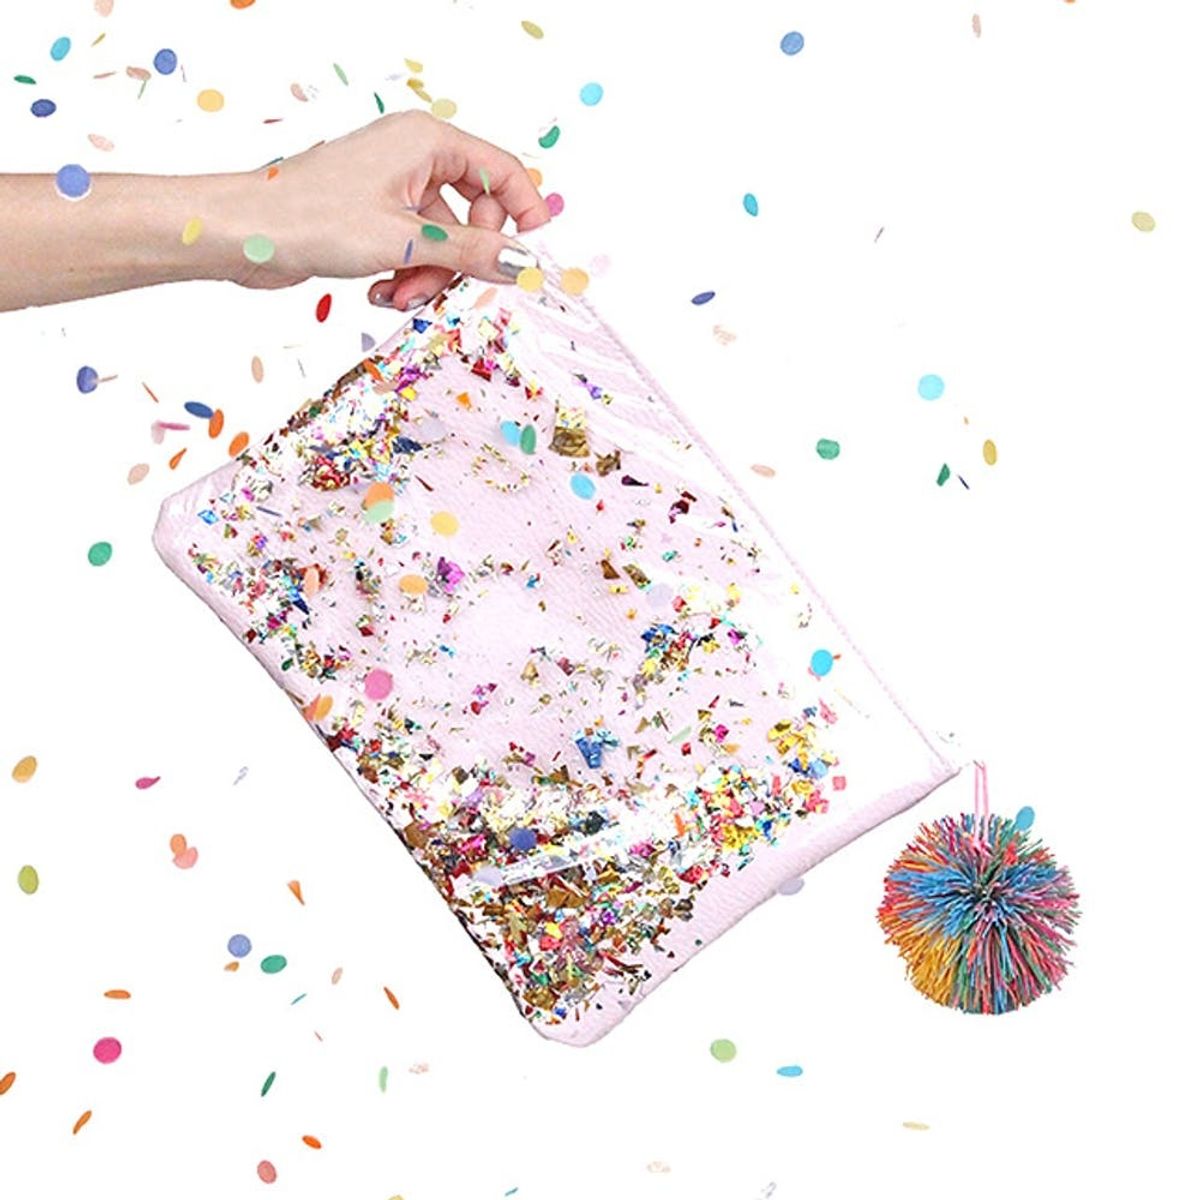 How to Make a Confetti Clutch to Complete Your New Year’s Eve Look